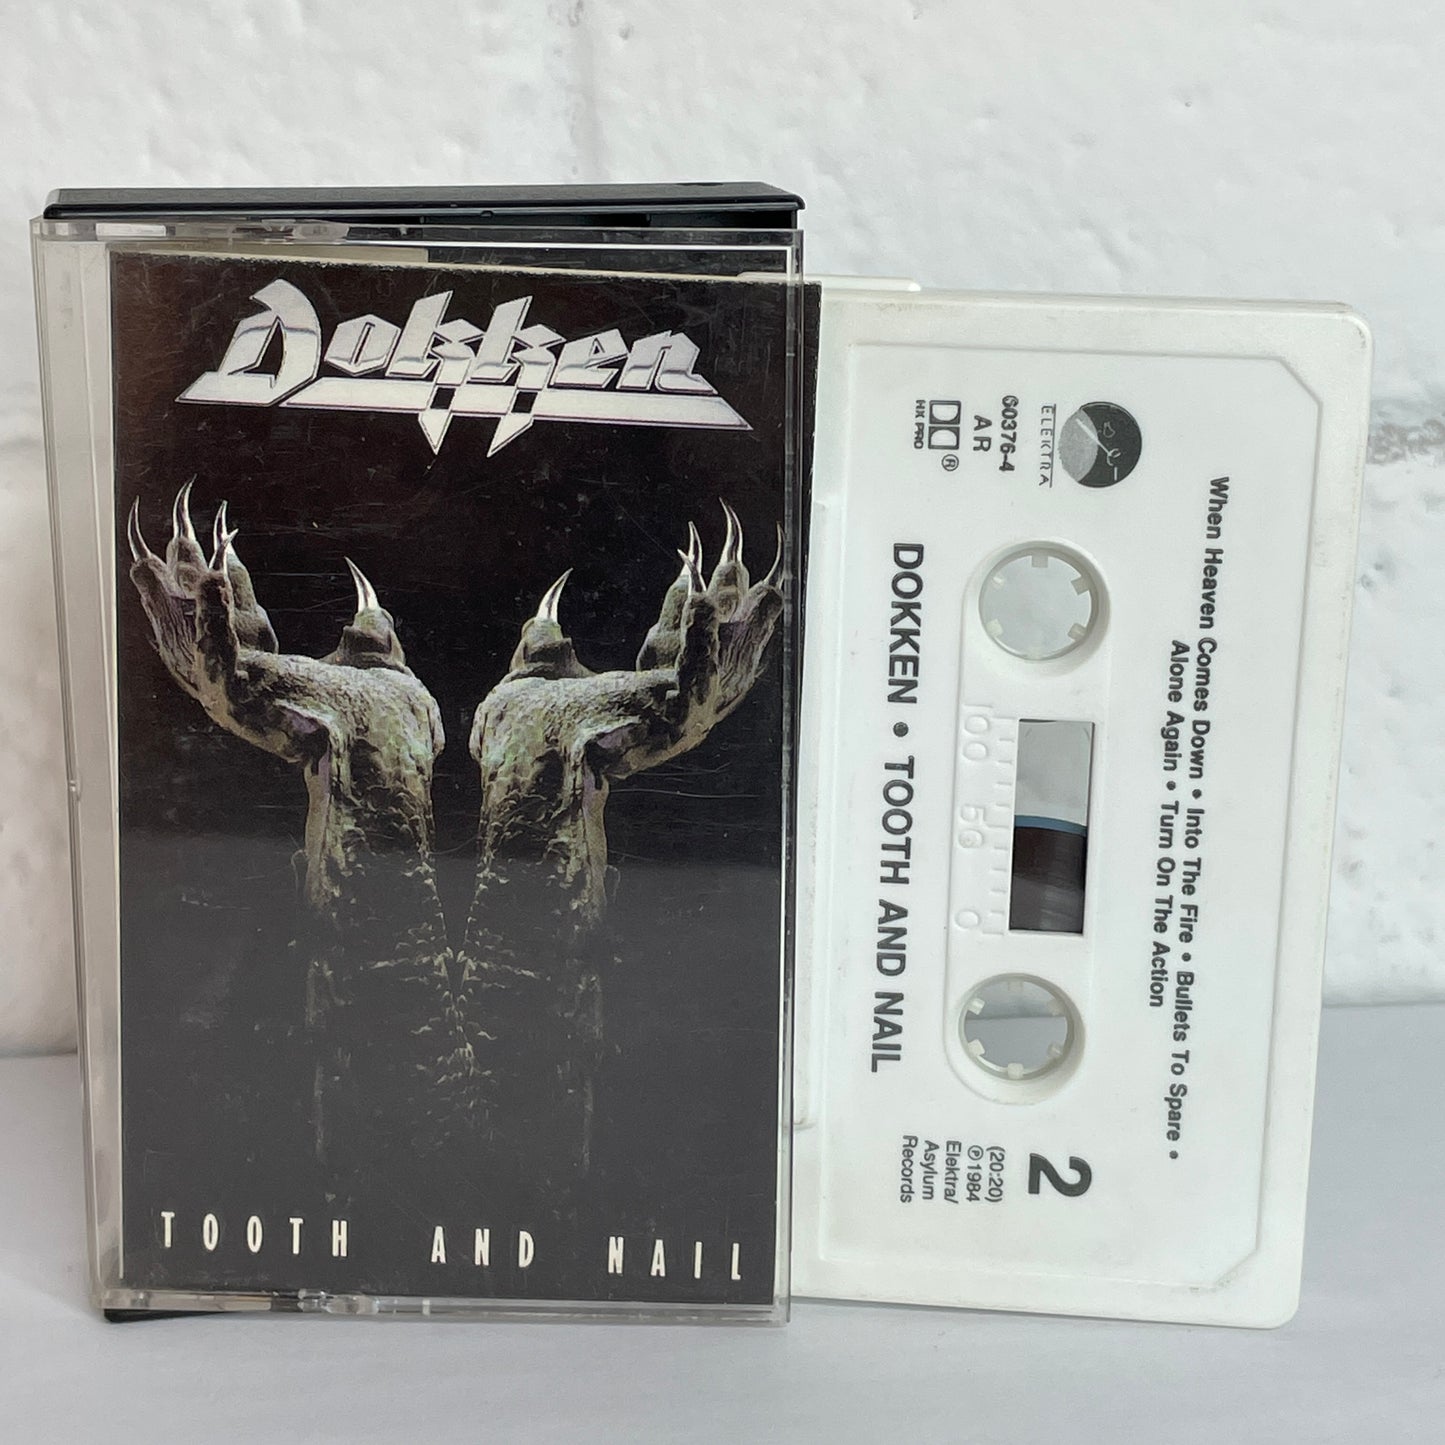 Dokken - Tooth and Nail original cassette tape